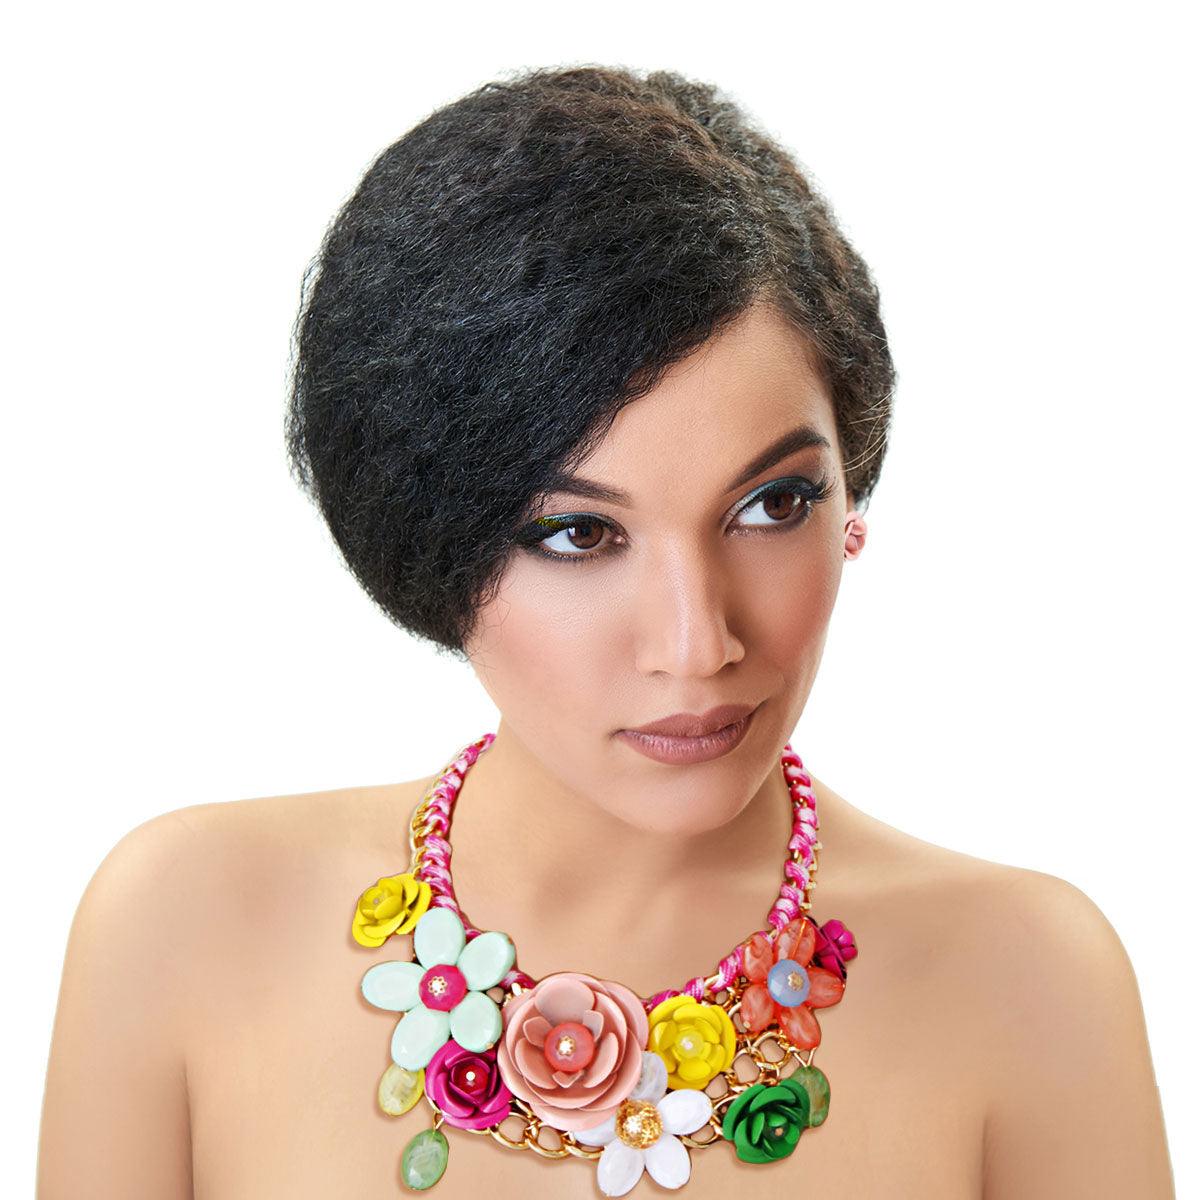 Look Fab in Our Comeback Floral Frenzy Necklace Set